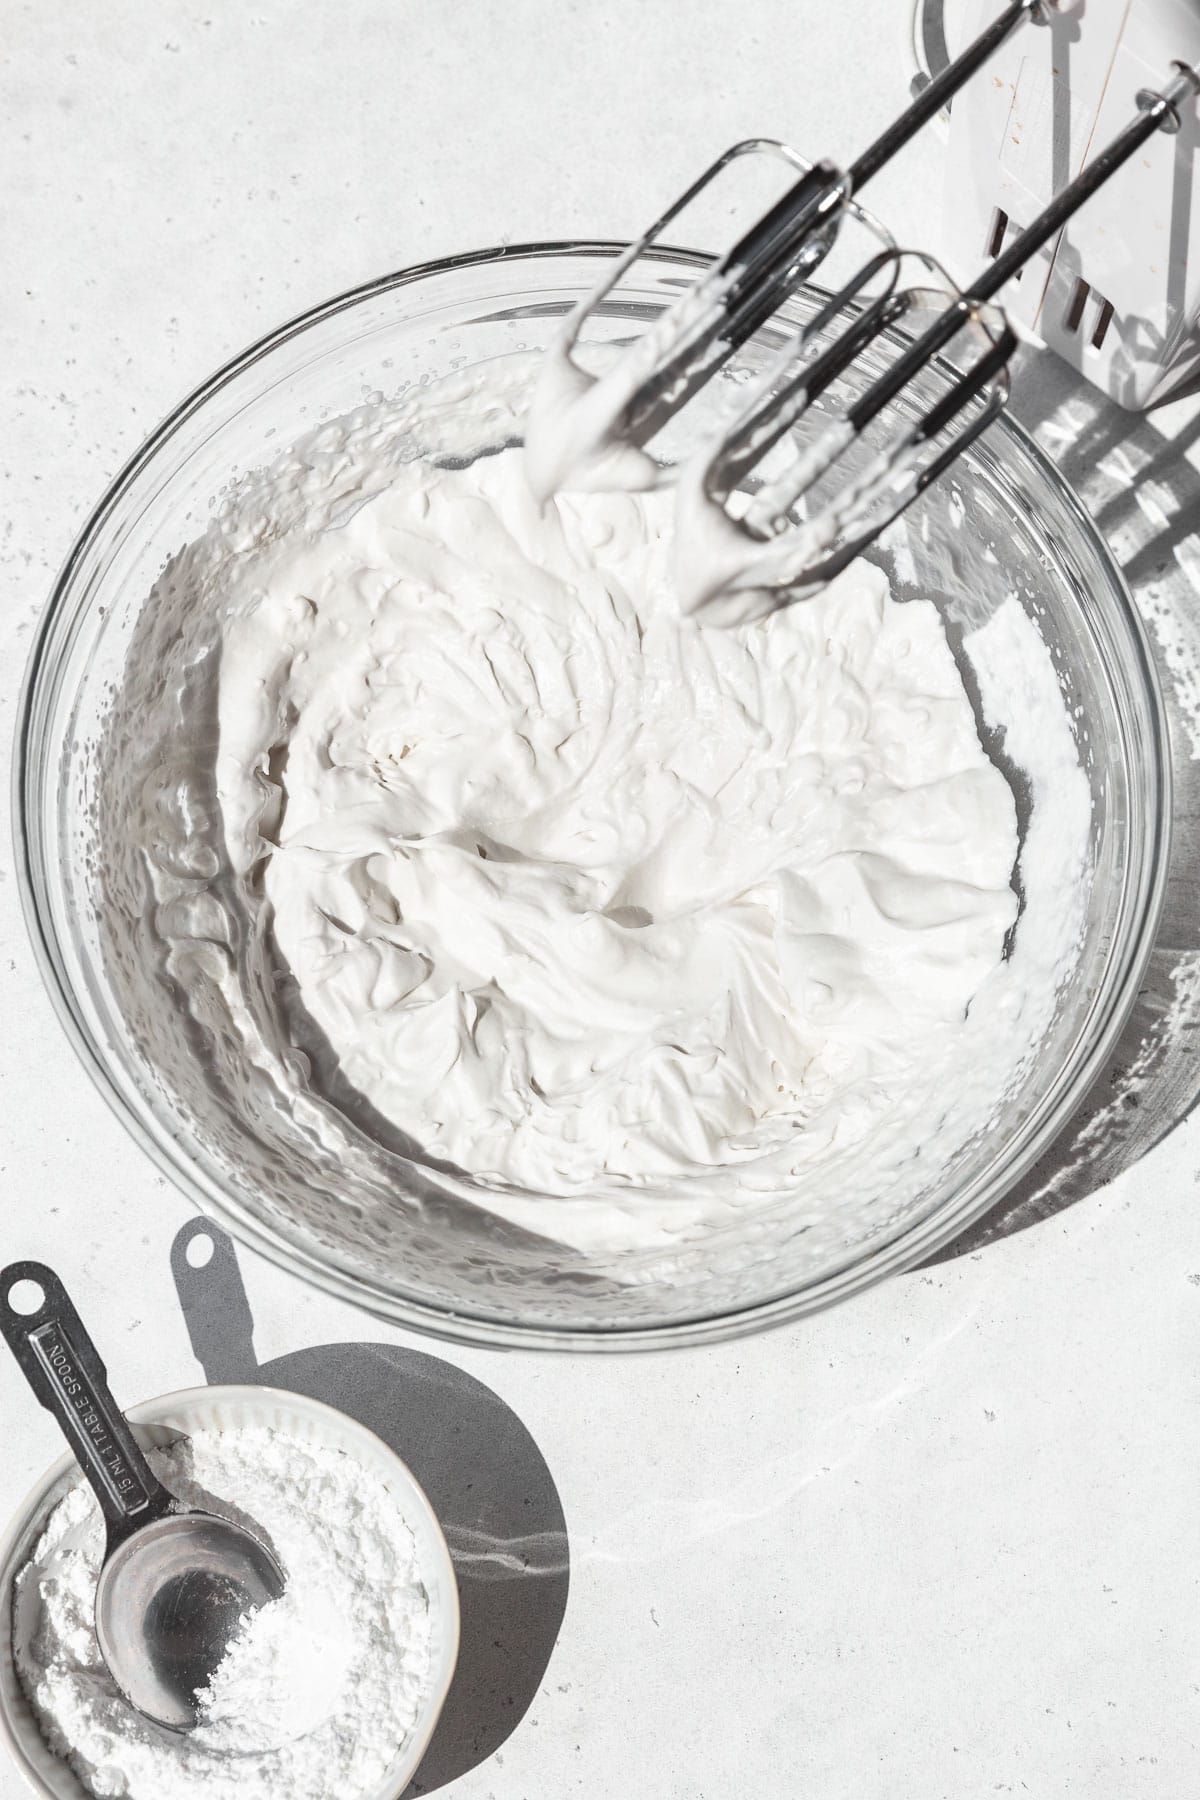 Vegan whipped cream in a mixing bowl after beating to stiff peaks.